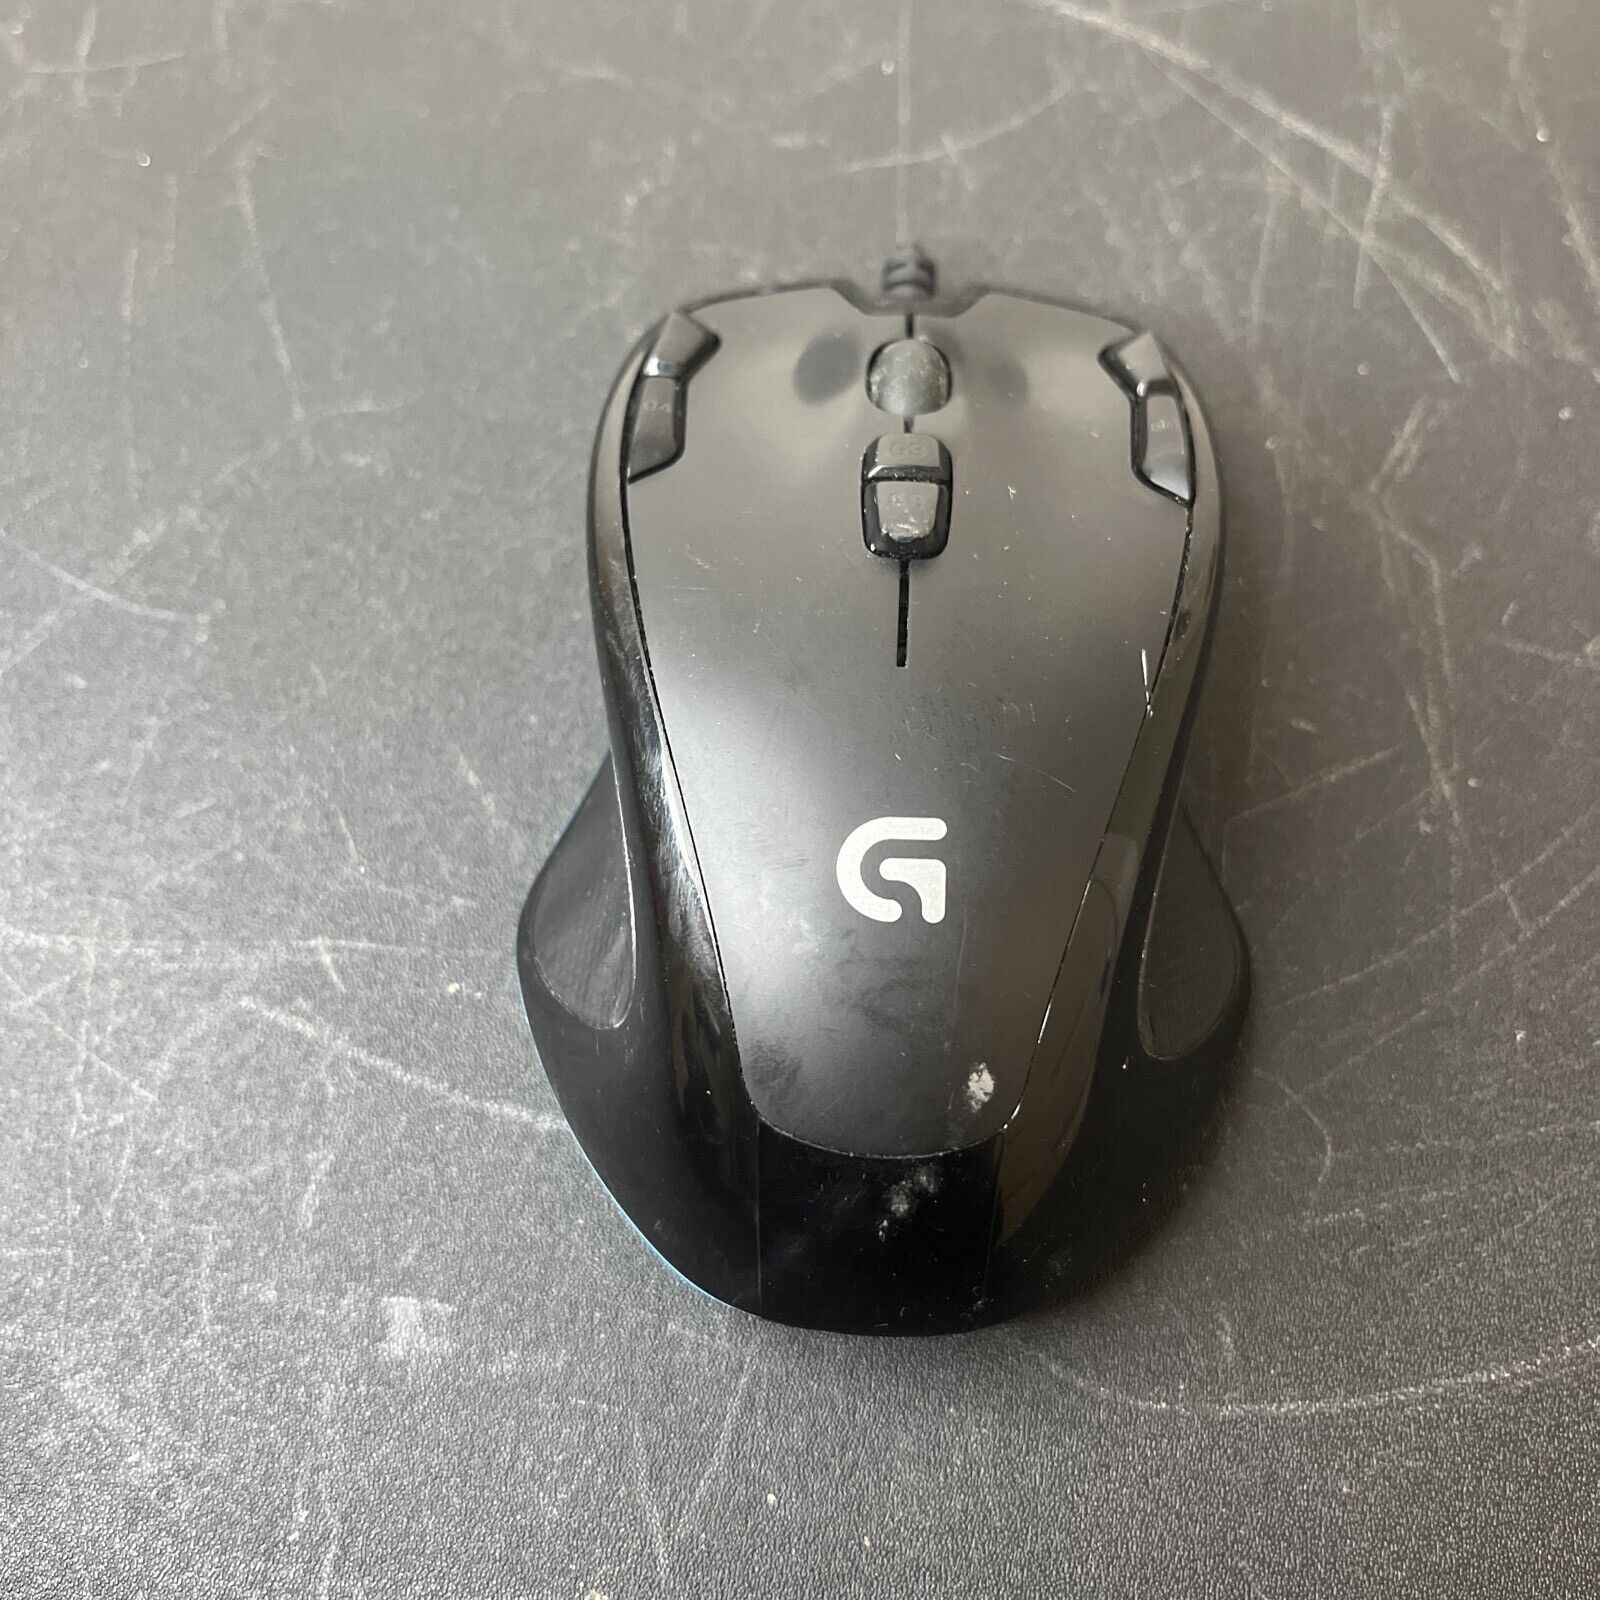 Logitech G300s Optical Ambidextrous Gaming Mouse – 9 Programmable Buttons